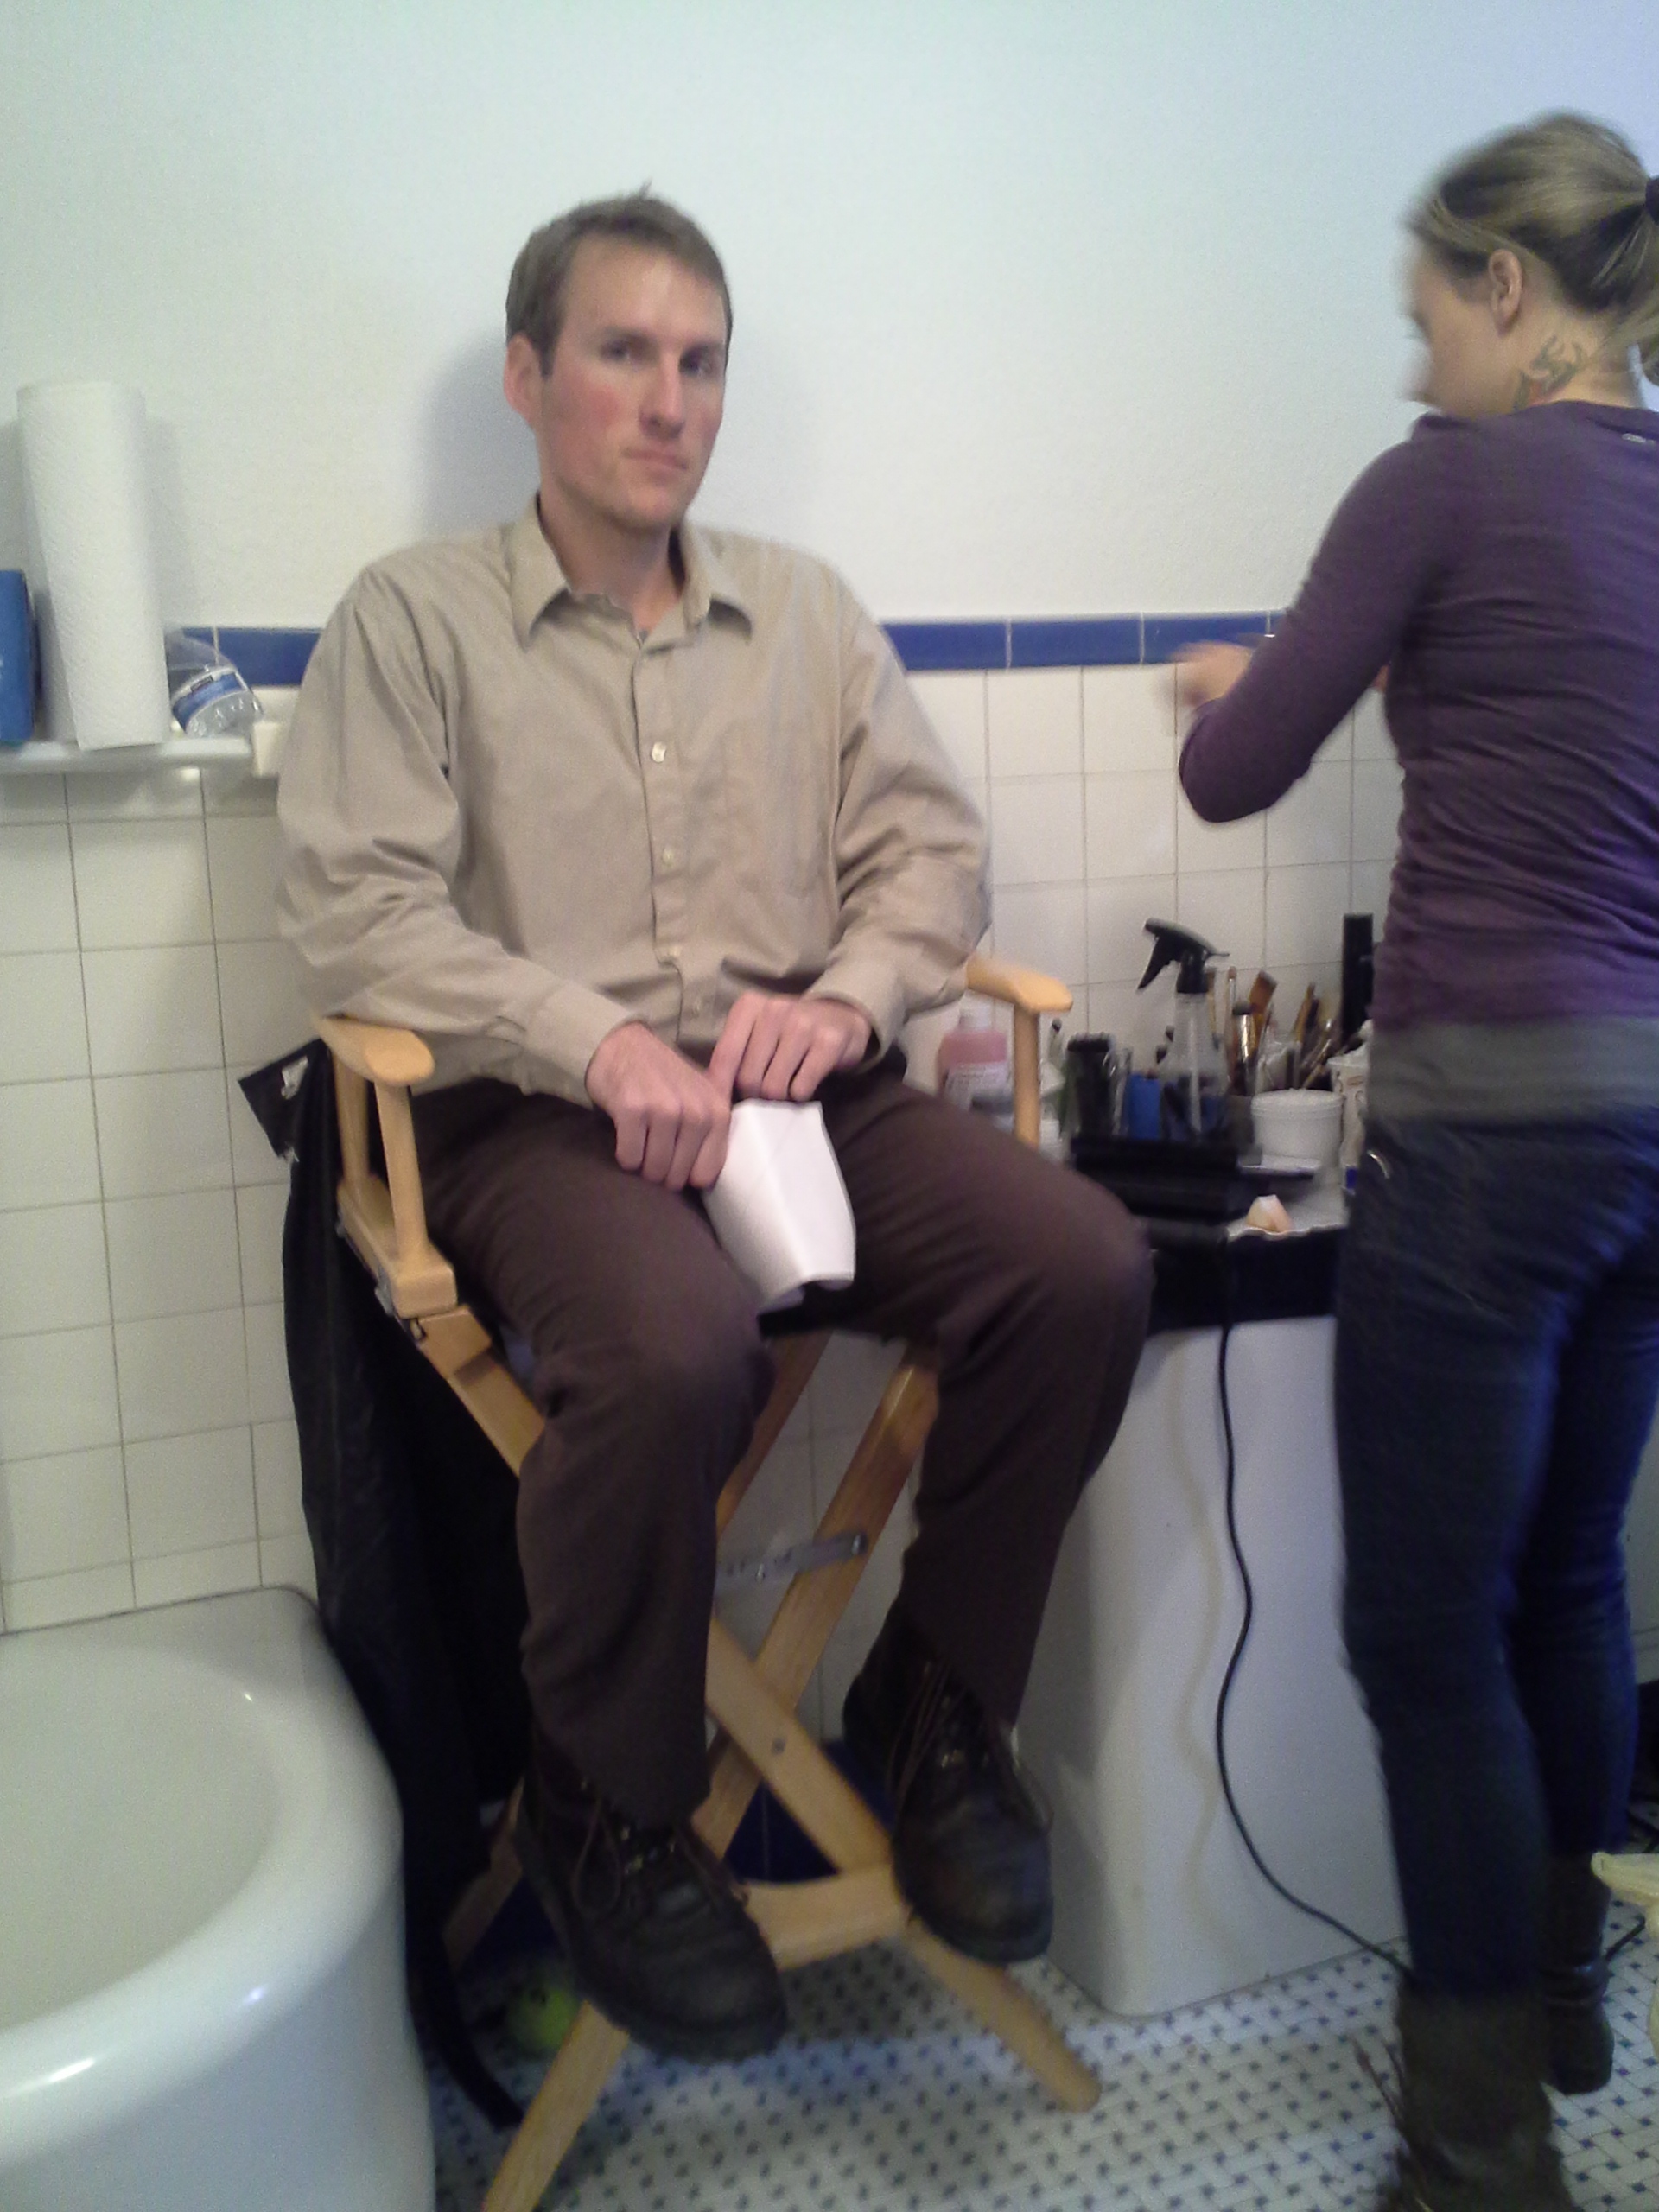 Producer/ Director/ Actor of Lake Eerie, Chris Majors, prepares for a scene while in the makeup room October 2013.